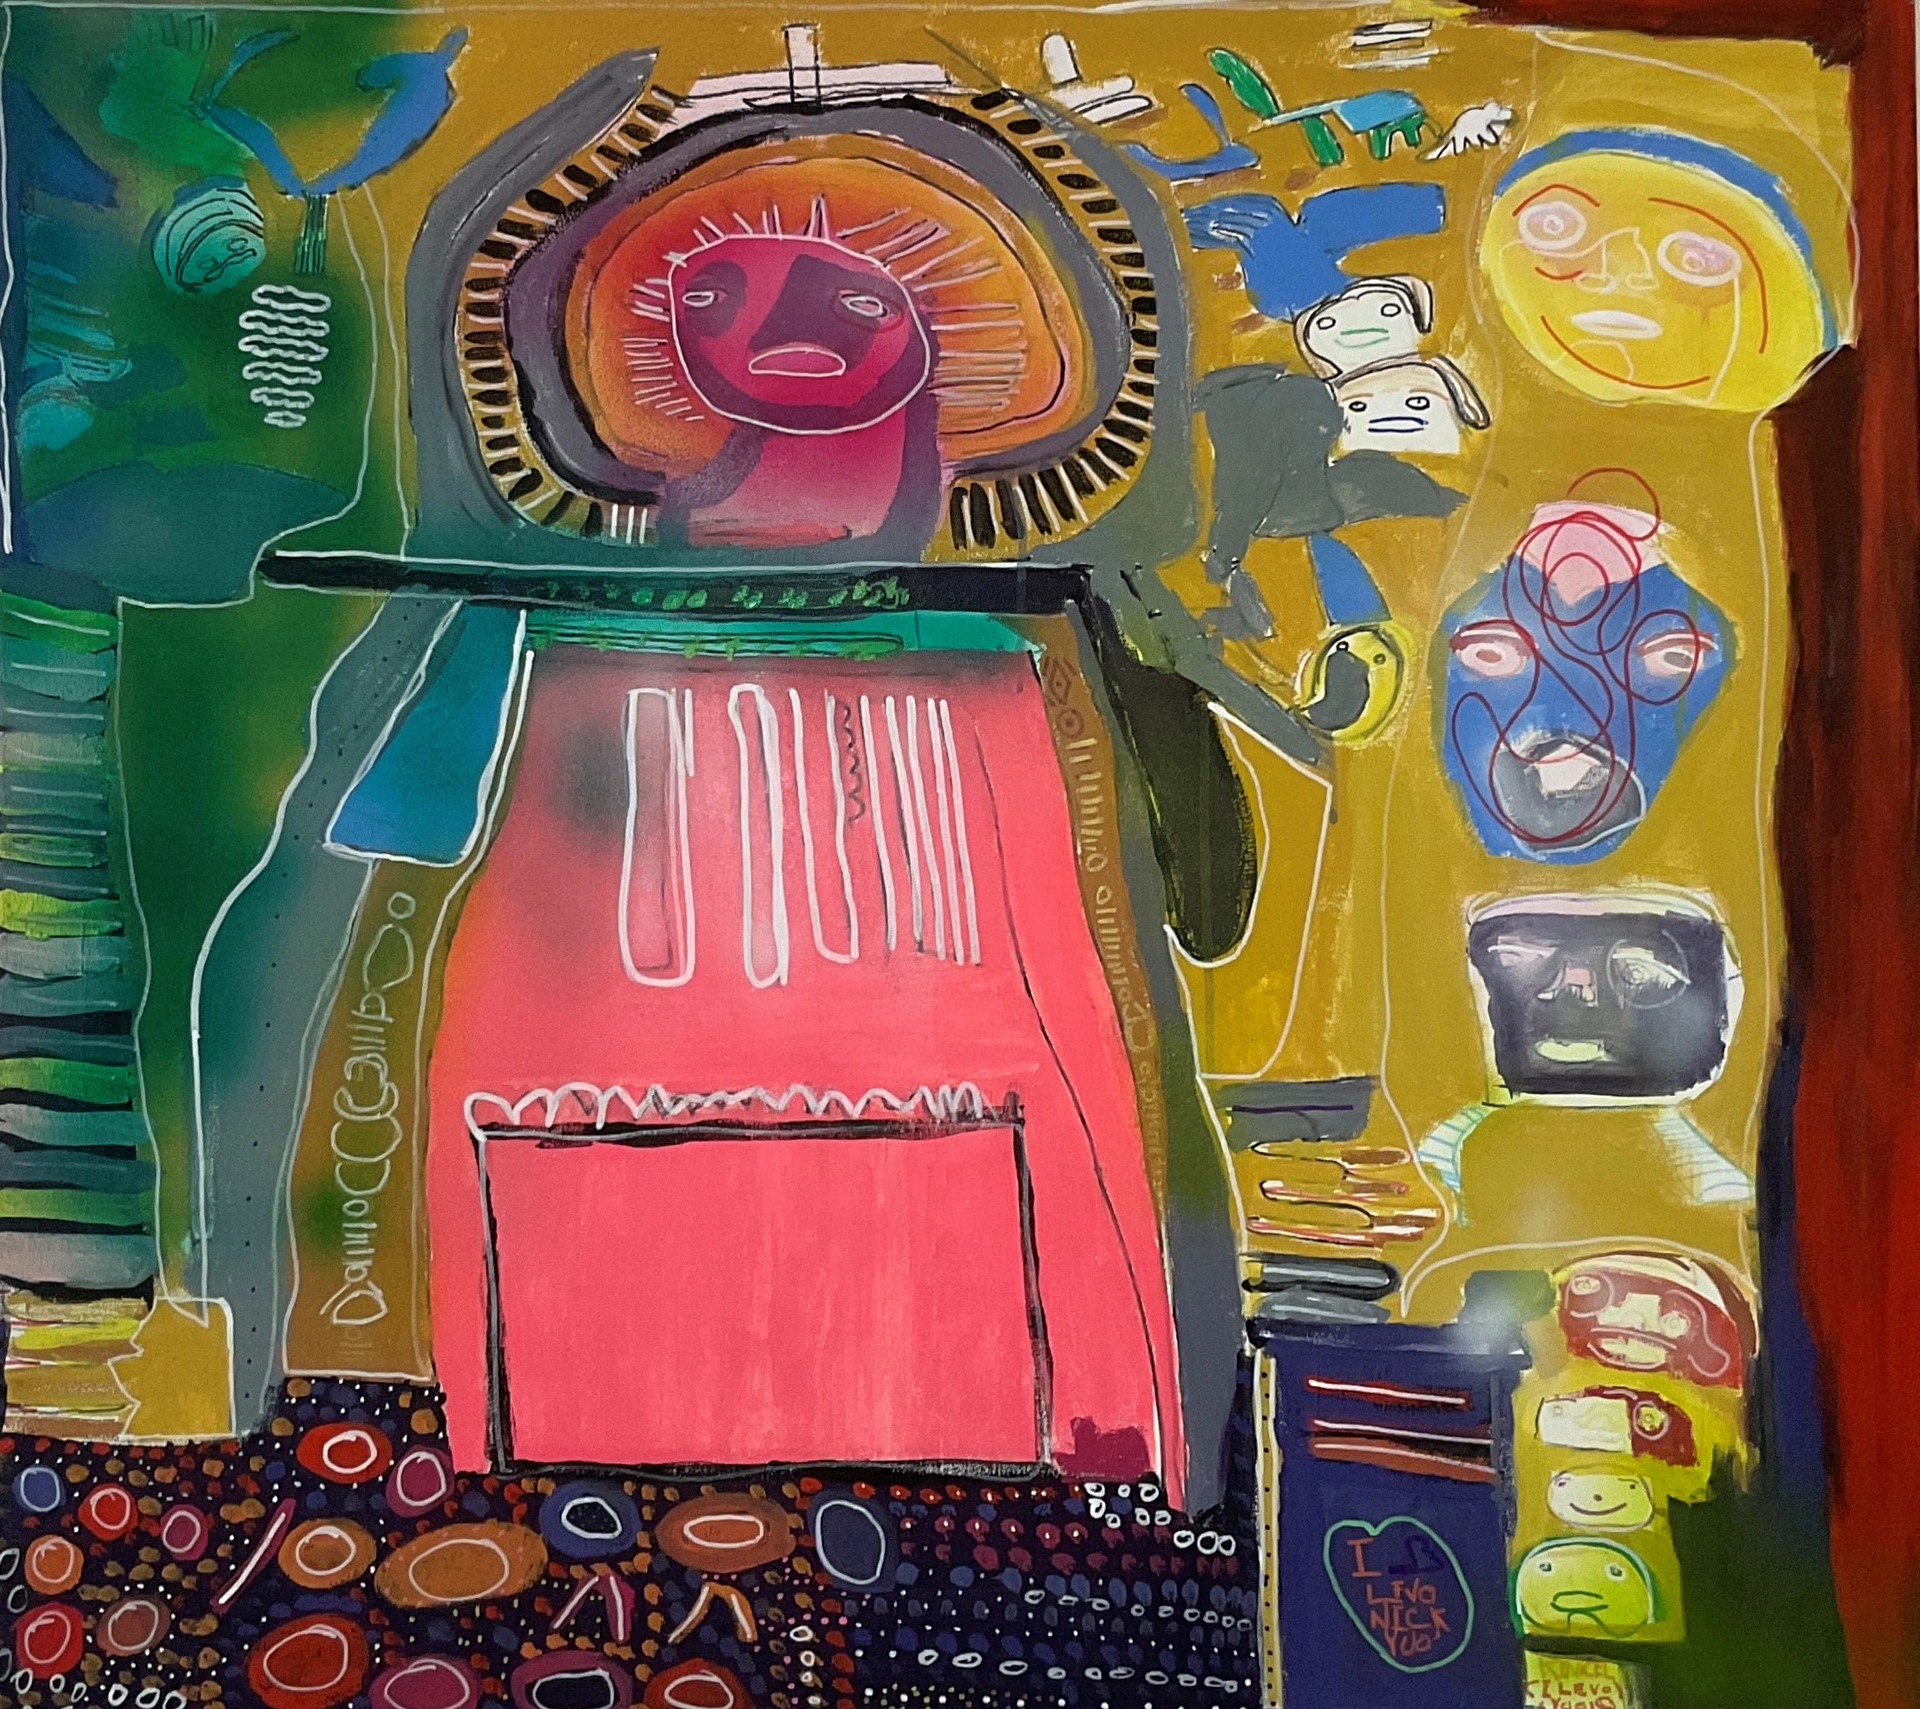 Inspired by the Beatles, this piece is described as “happiness and patterns for George Harrision.” Layers of colorful acrylics and airbrushing techniques combine to form the figurative presence of the classic Madonna and child in a cool coral, with featured members of the Beatles. On the left there is a column of large faces in yellow, blue, and black. Smaller face shapes in red, white and yellow continue down. Below the Madonna figure there are dark small circles in muted navy, red, black, and orange.